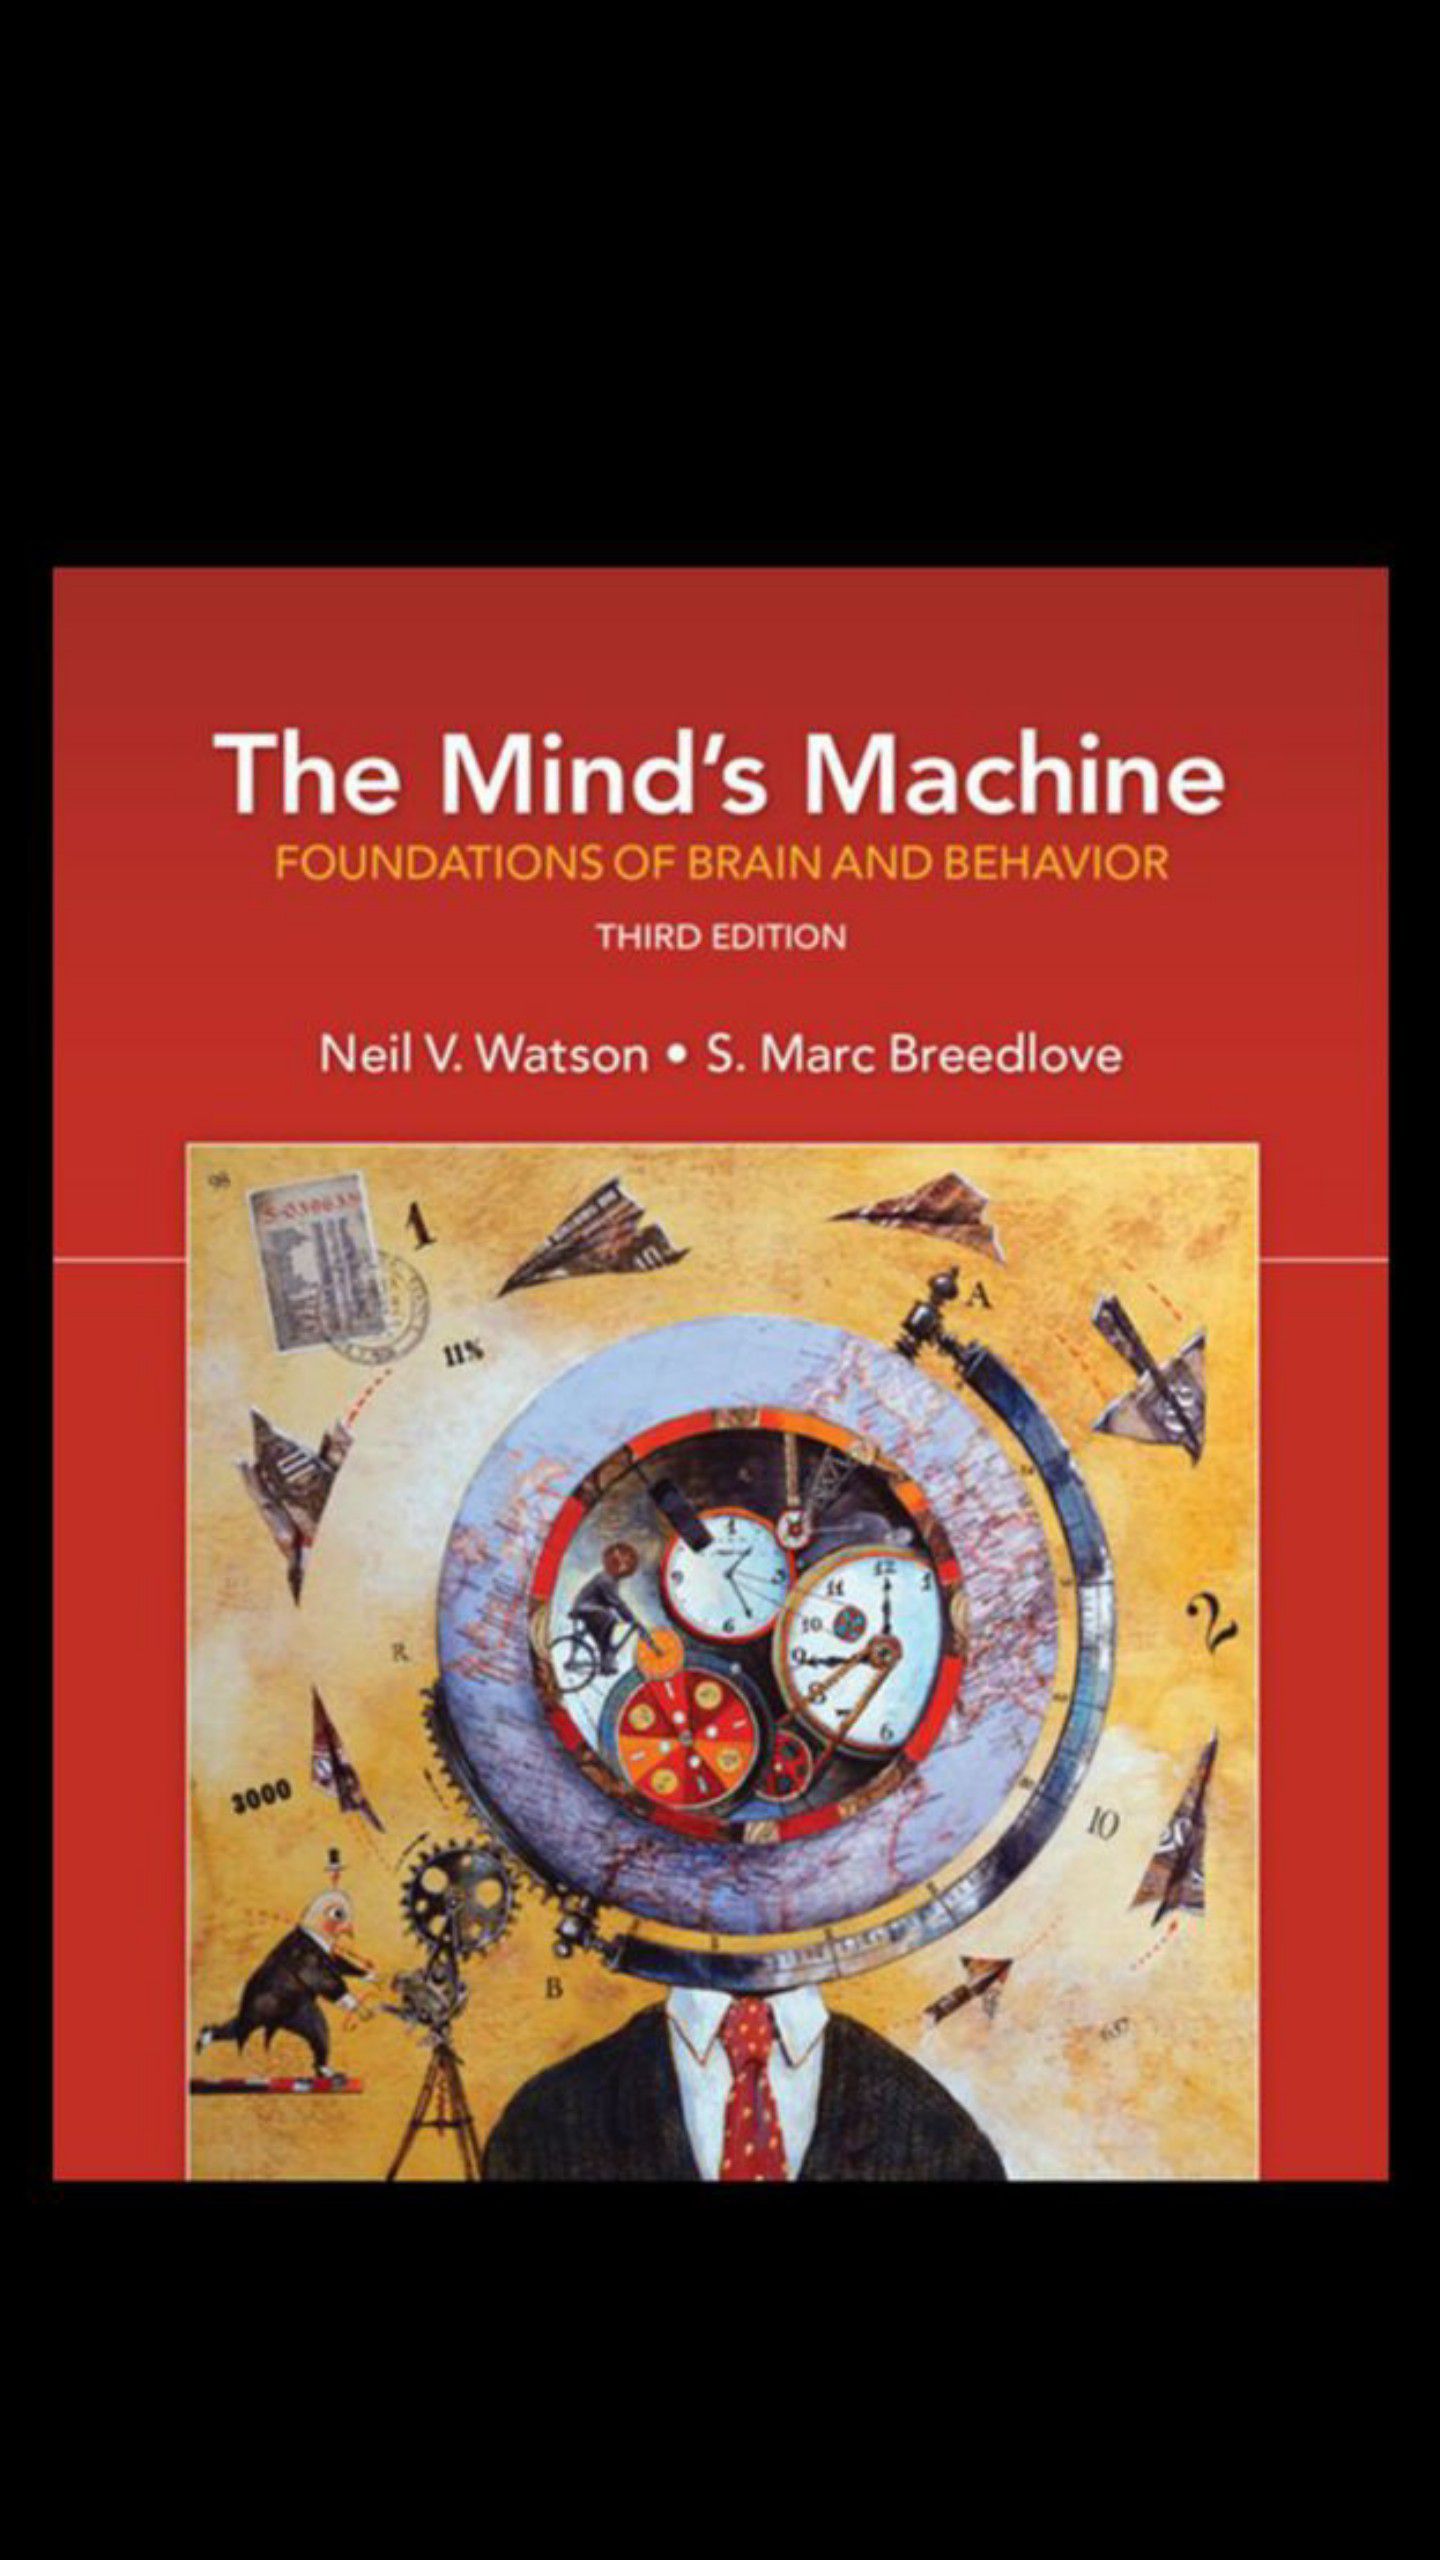 The Mind's Machine 3e by Watson and Breedlove. ISBN- 9781605357300.